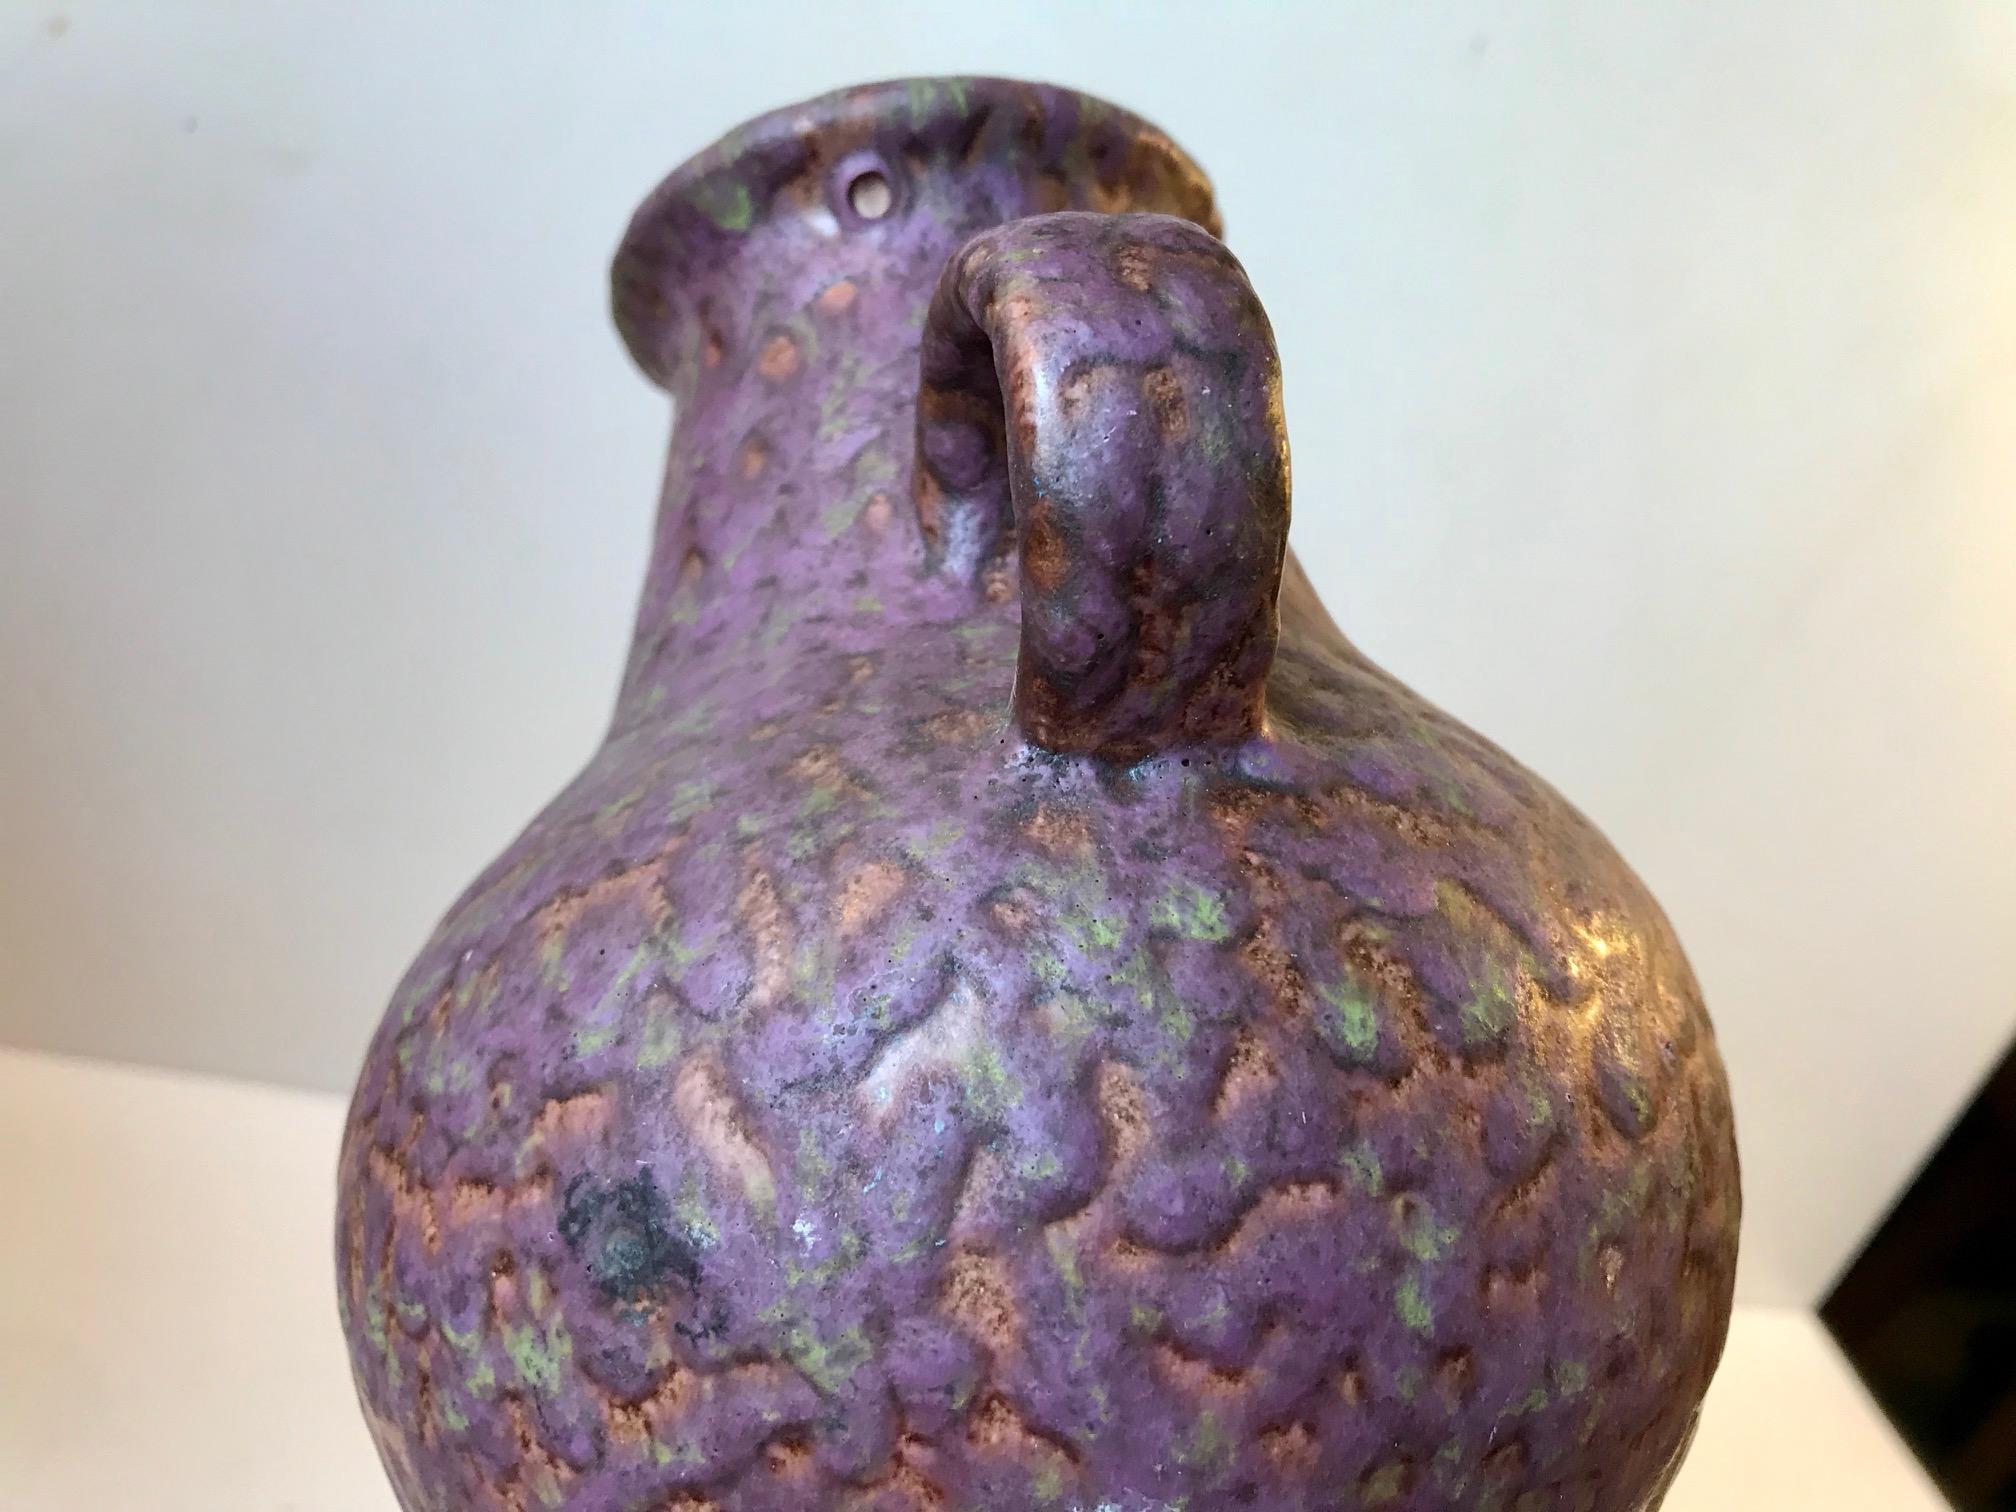 Unique looking vase covered all over in a mixed fatlava glaze of purple, rose and greens nuances. Designed and made by Dumler & Breiden in Germany during the 1970s. Imprinted/signed by maker and numbered: 302/21 - 74.